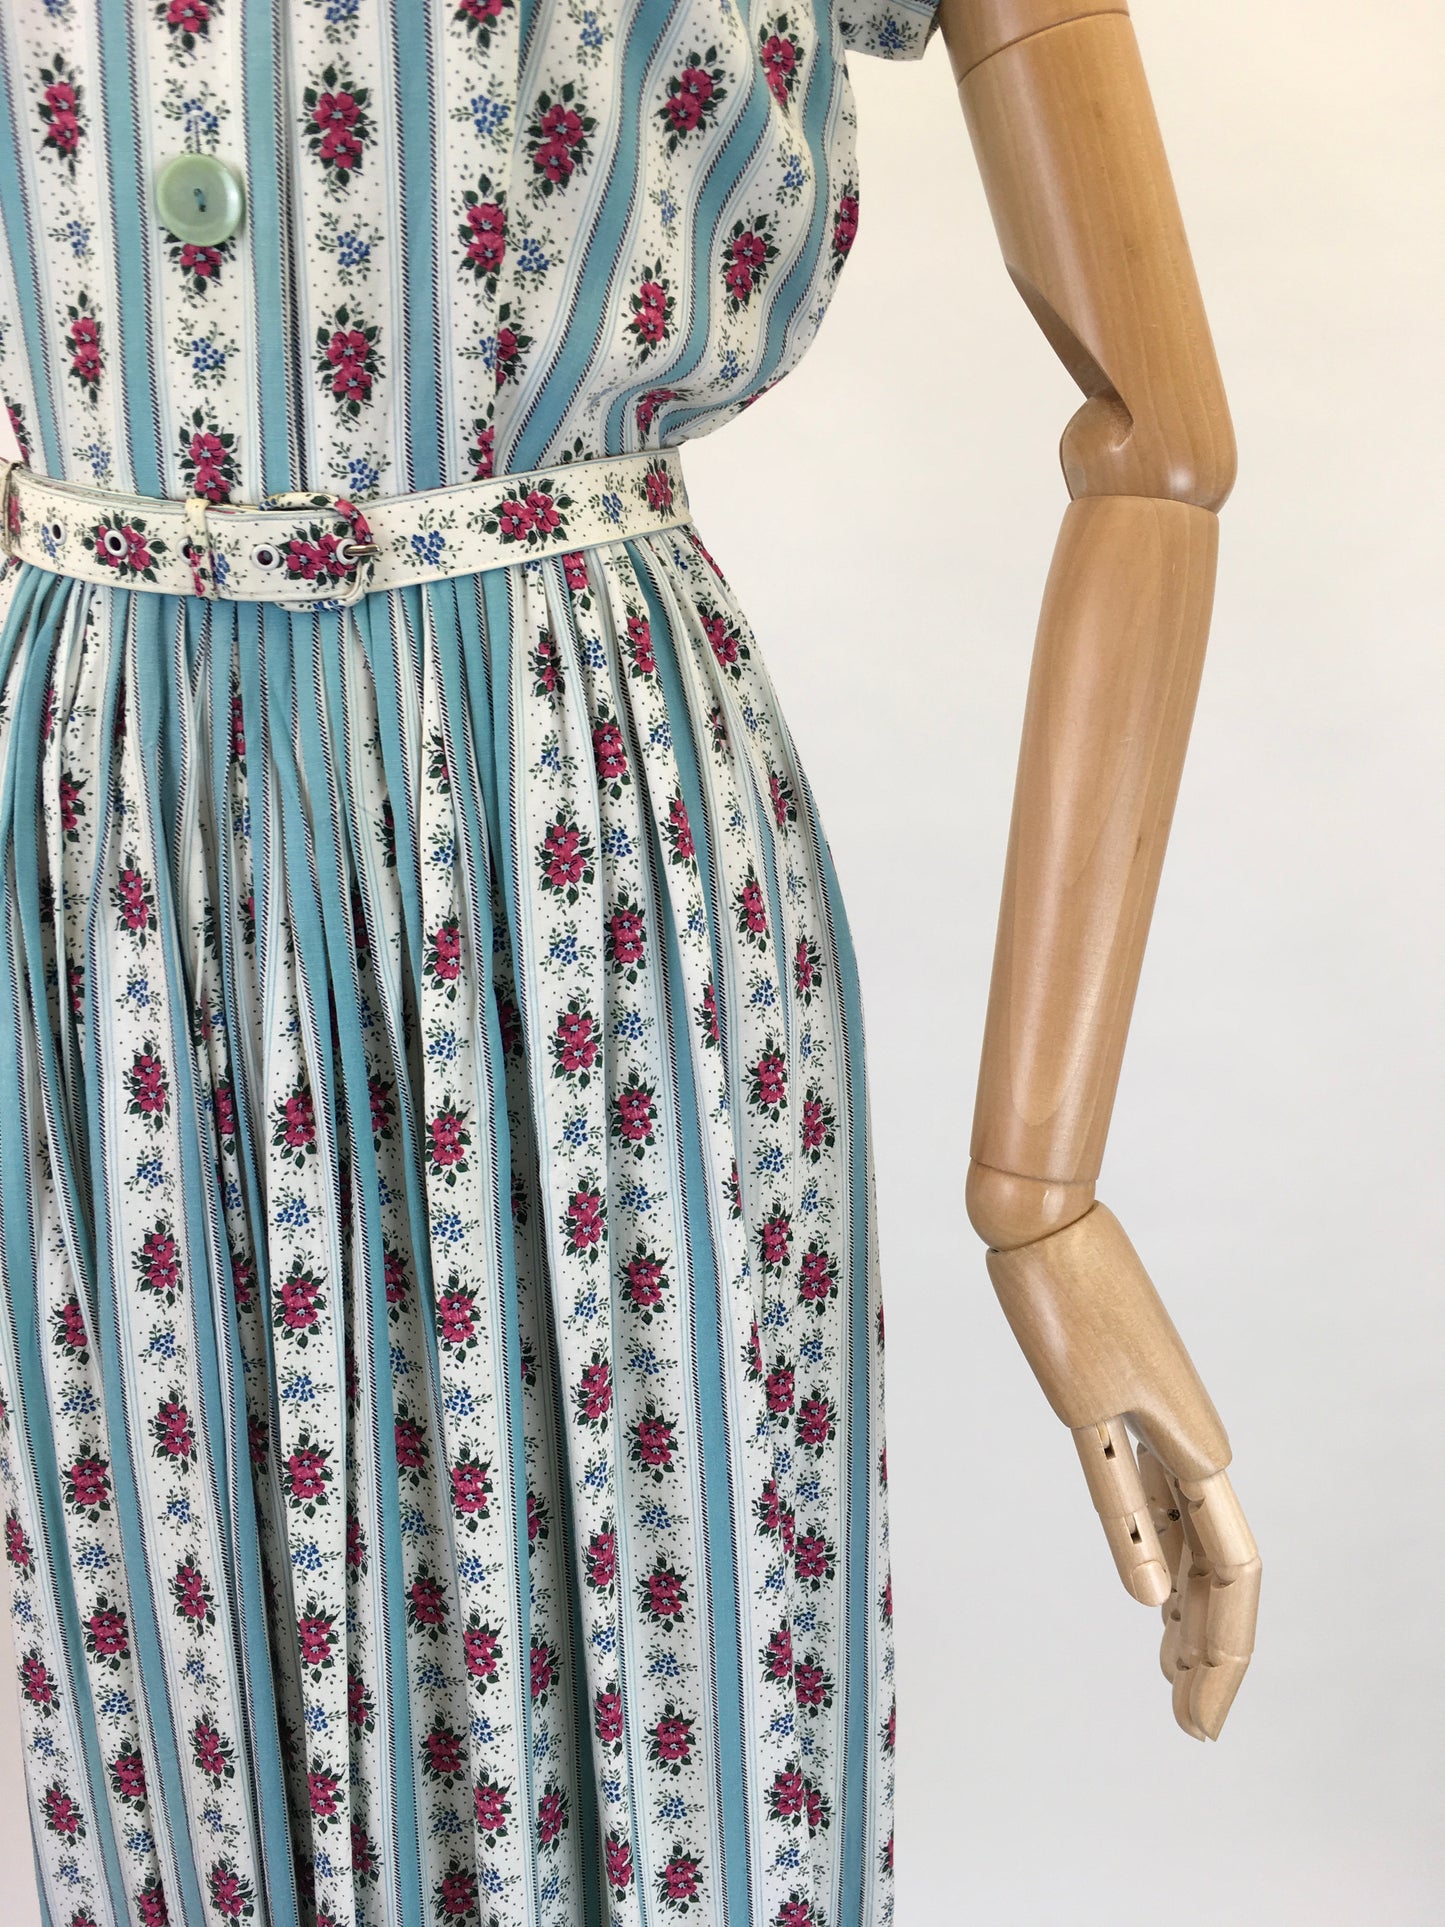 Original 1950’s ‘ St. Michael’ Floral Cotton Day Dress - In Beautiful Blues, Pinks, Greens and Whites